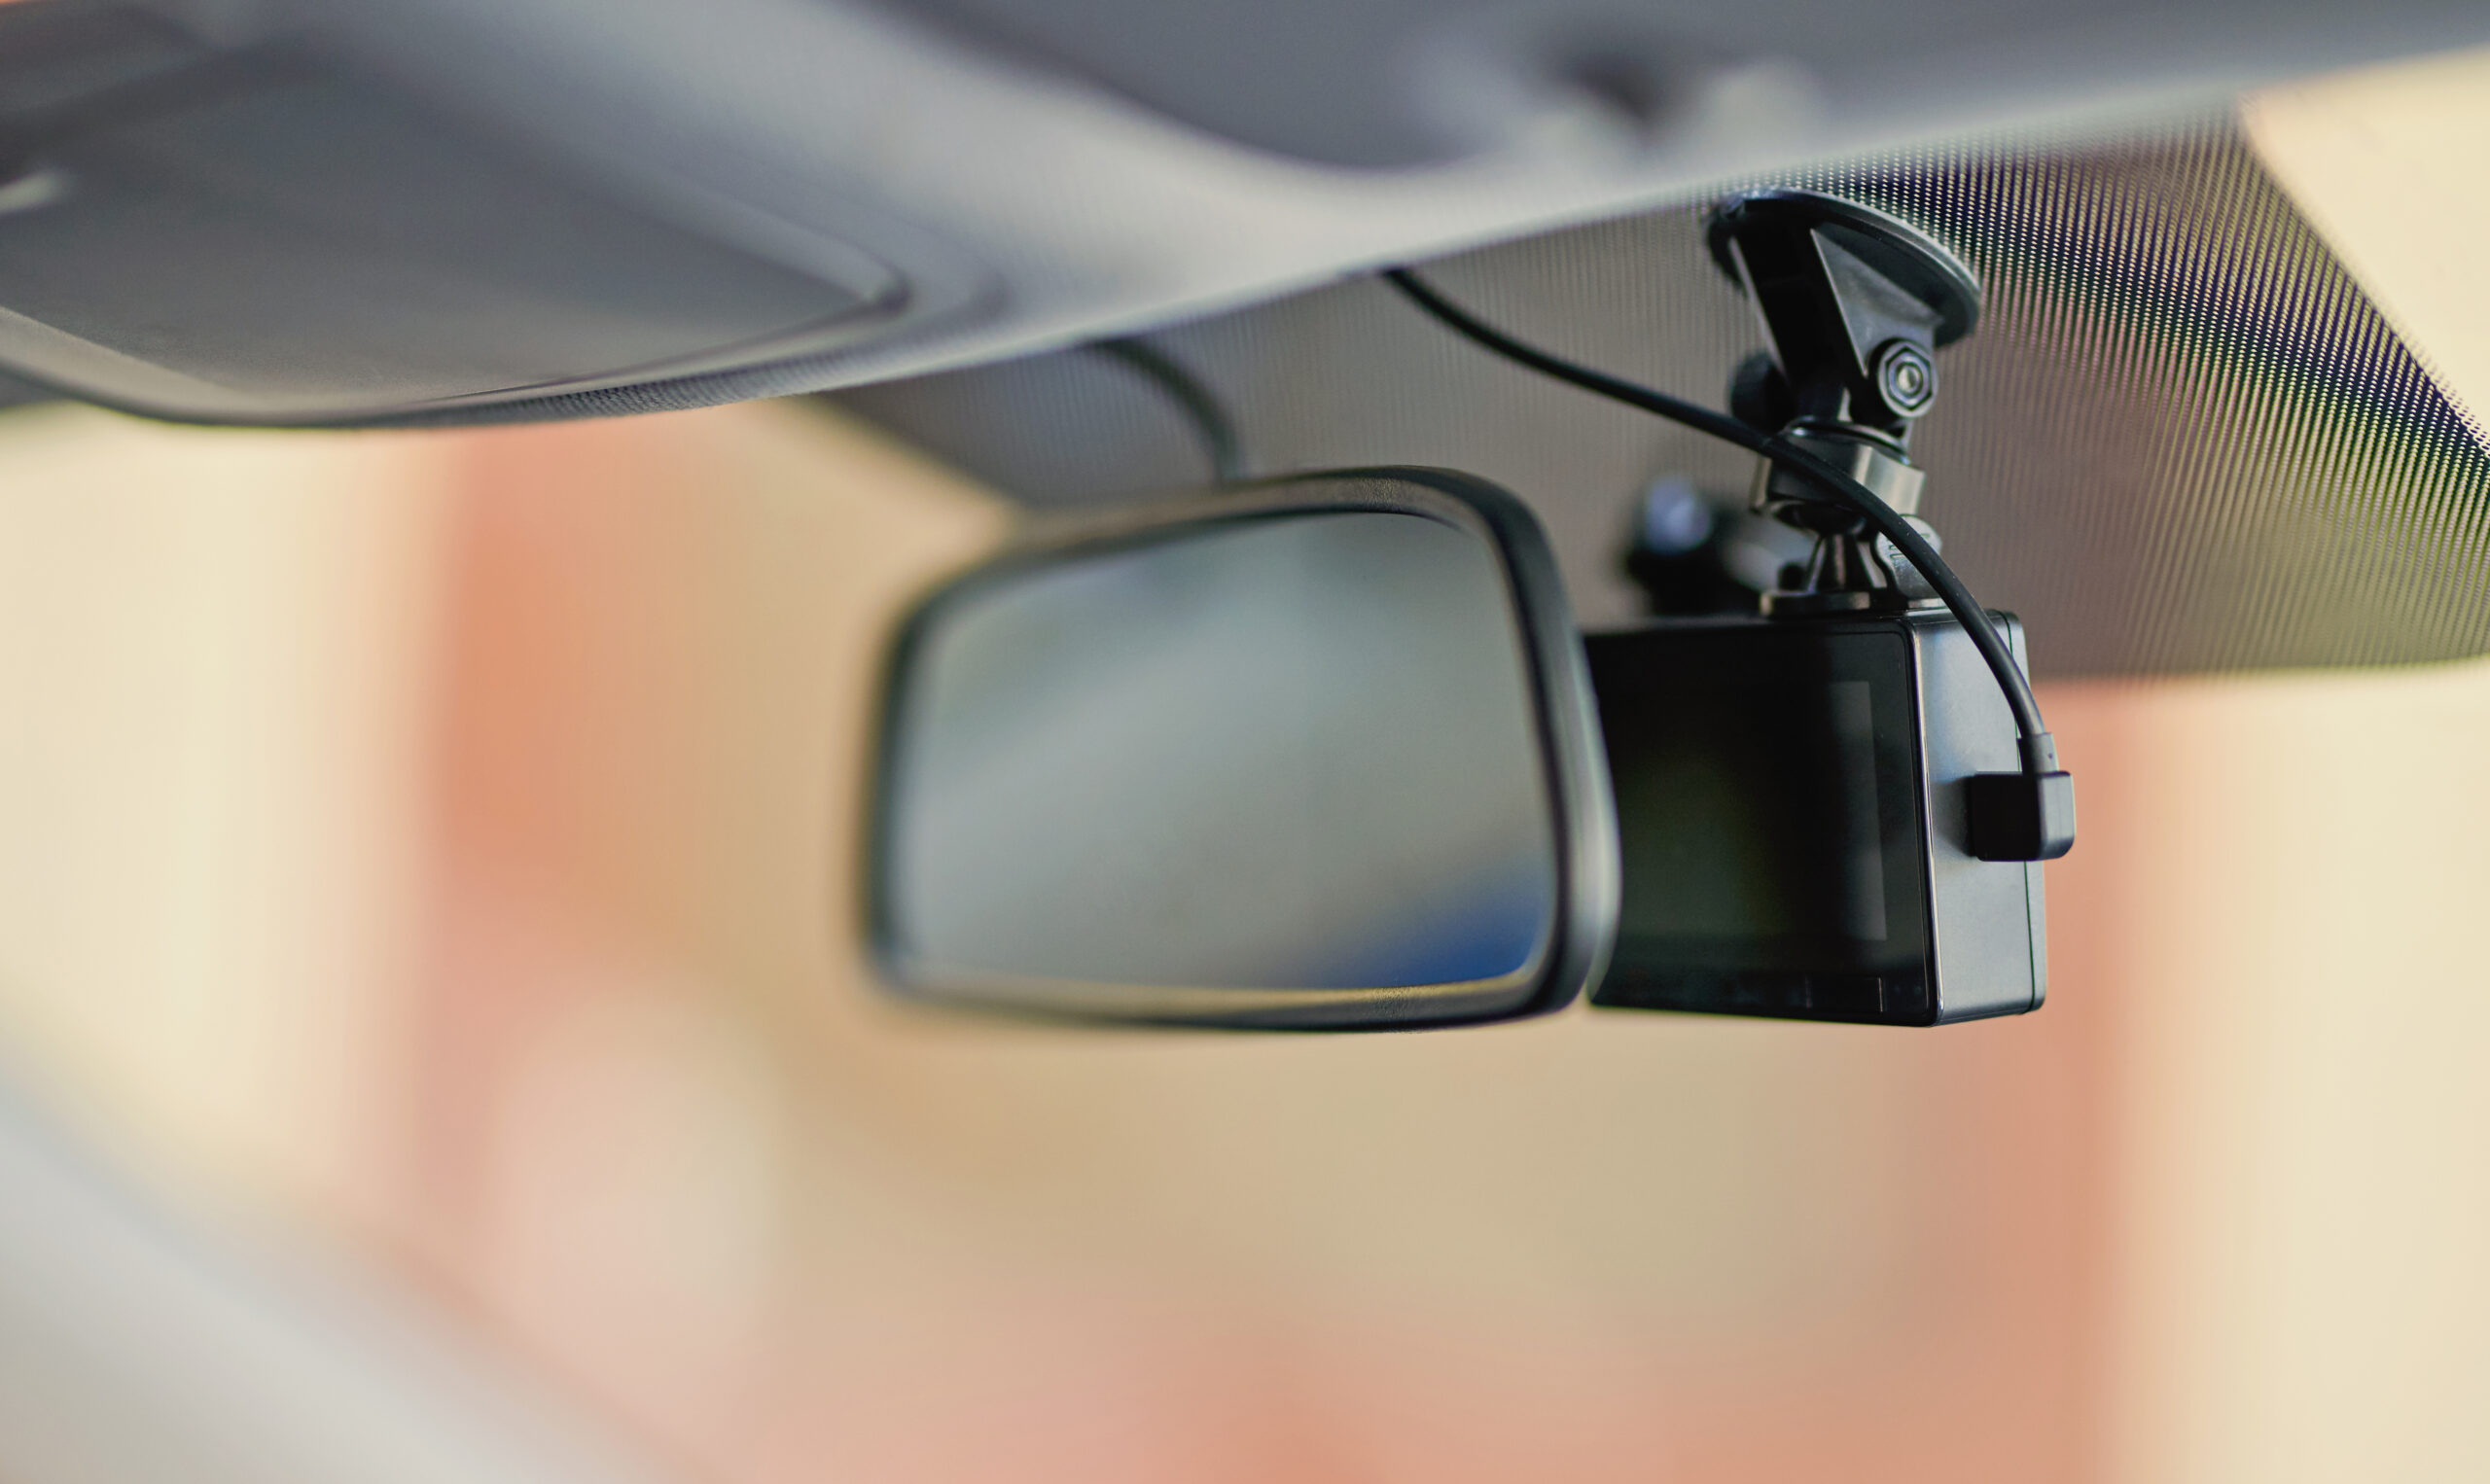 Image showing a dash cam mounted behind rear view mirror with power cable going up into car's headliner